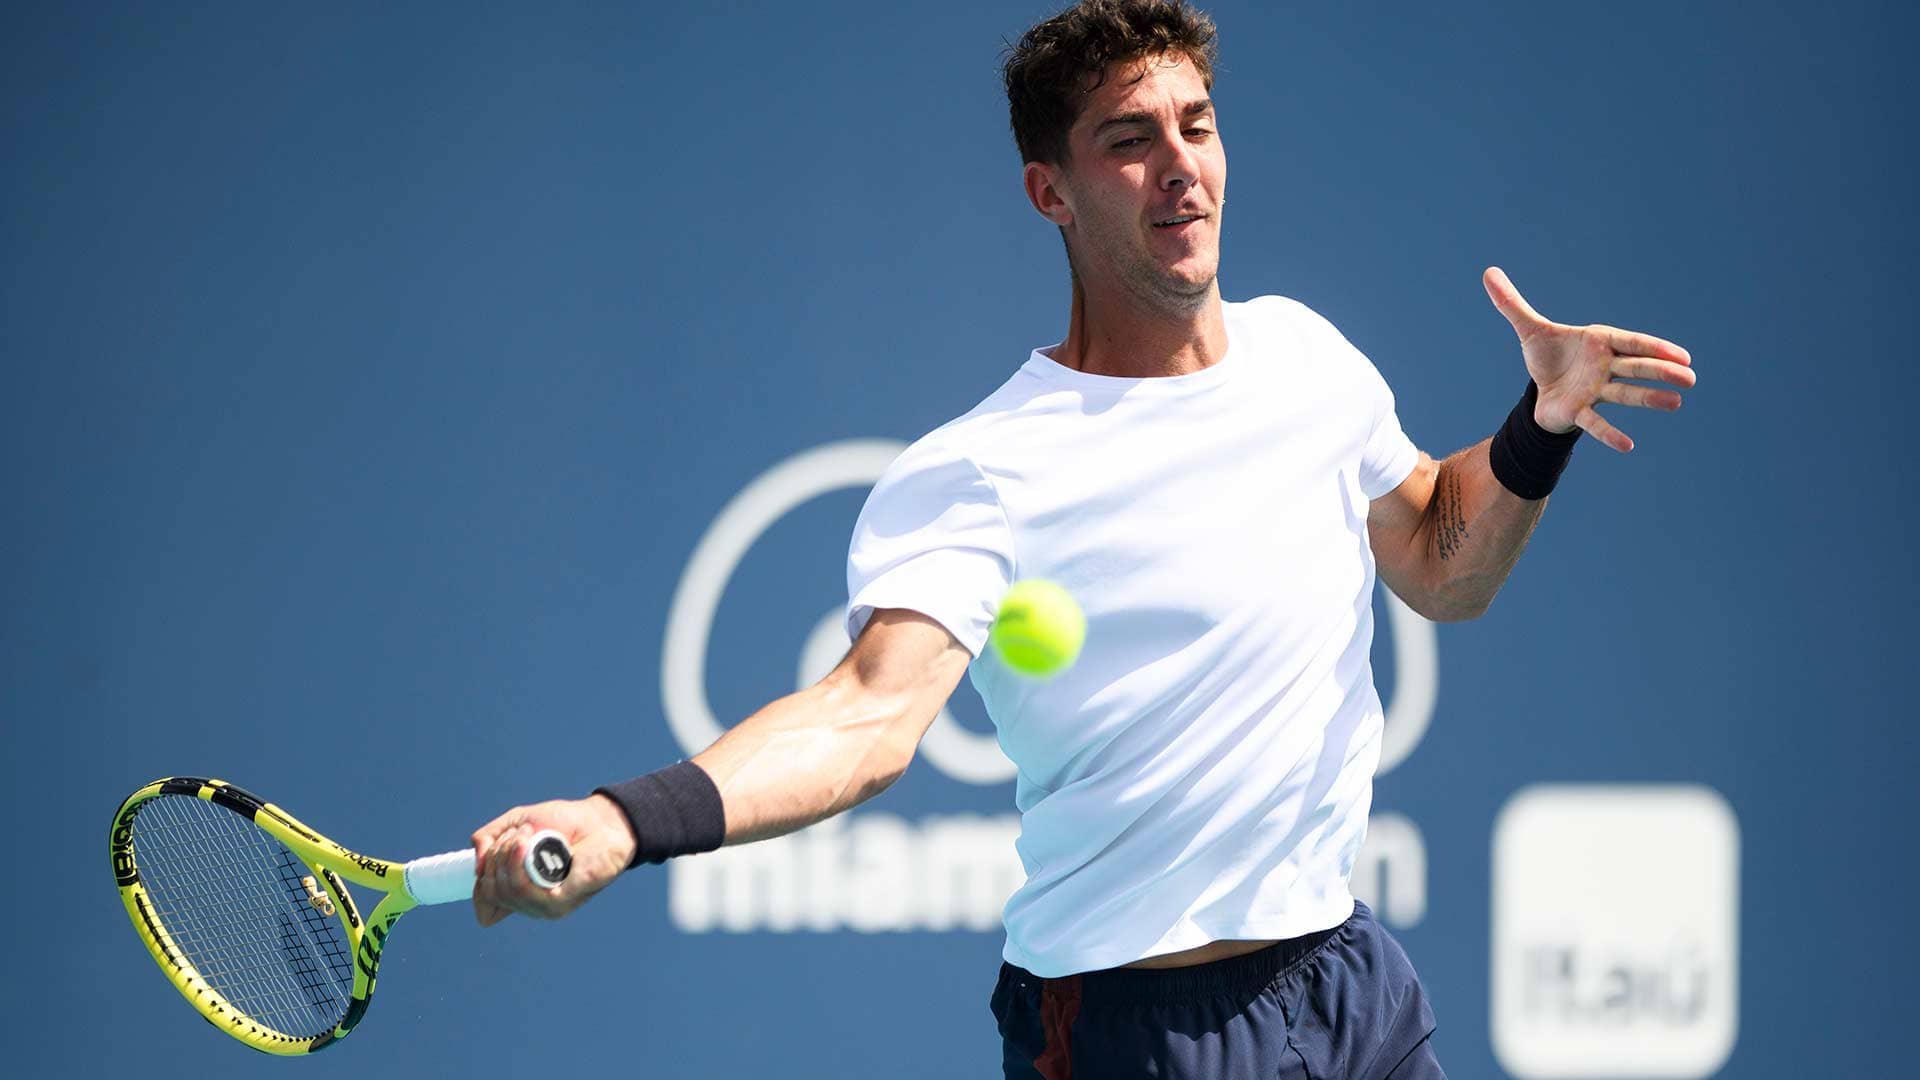 <a href='https://www.atptour.com/en/players/thanasi-kokkinakis/kd46/overview'>Thanasi Kokkinakis</a> is making his third appearance at the Miami Open presented by Itaú.